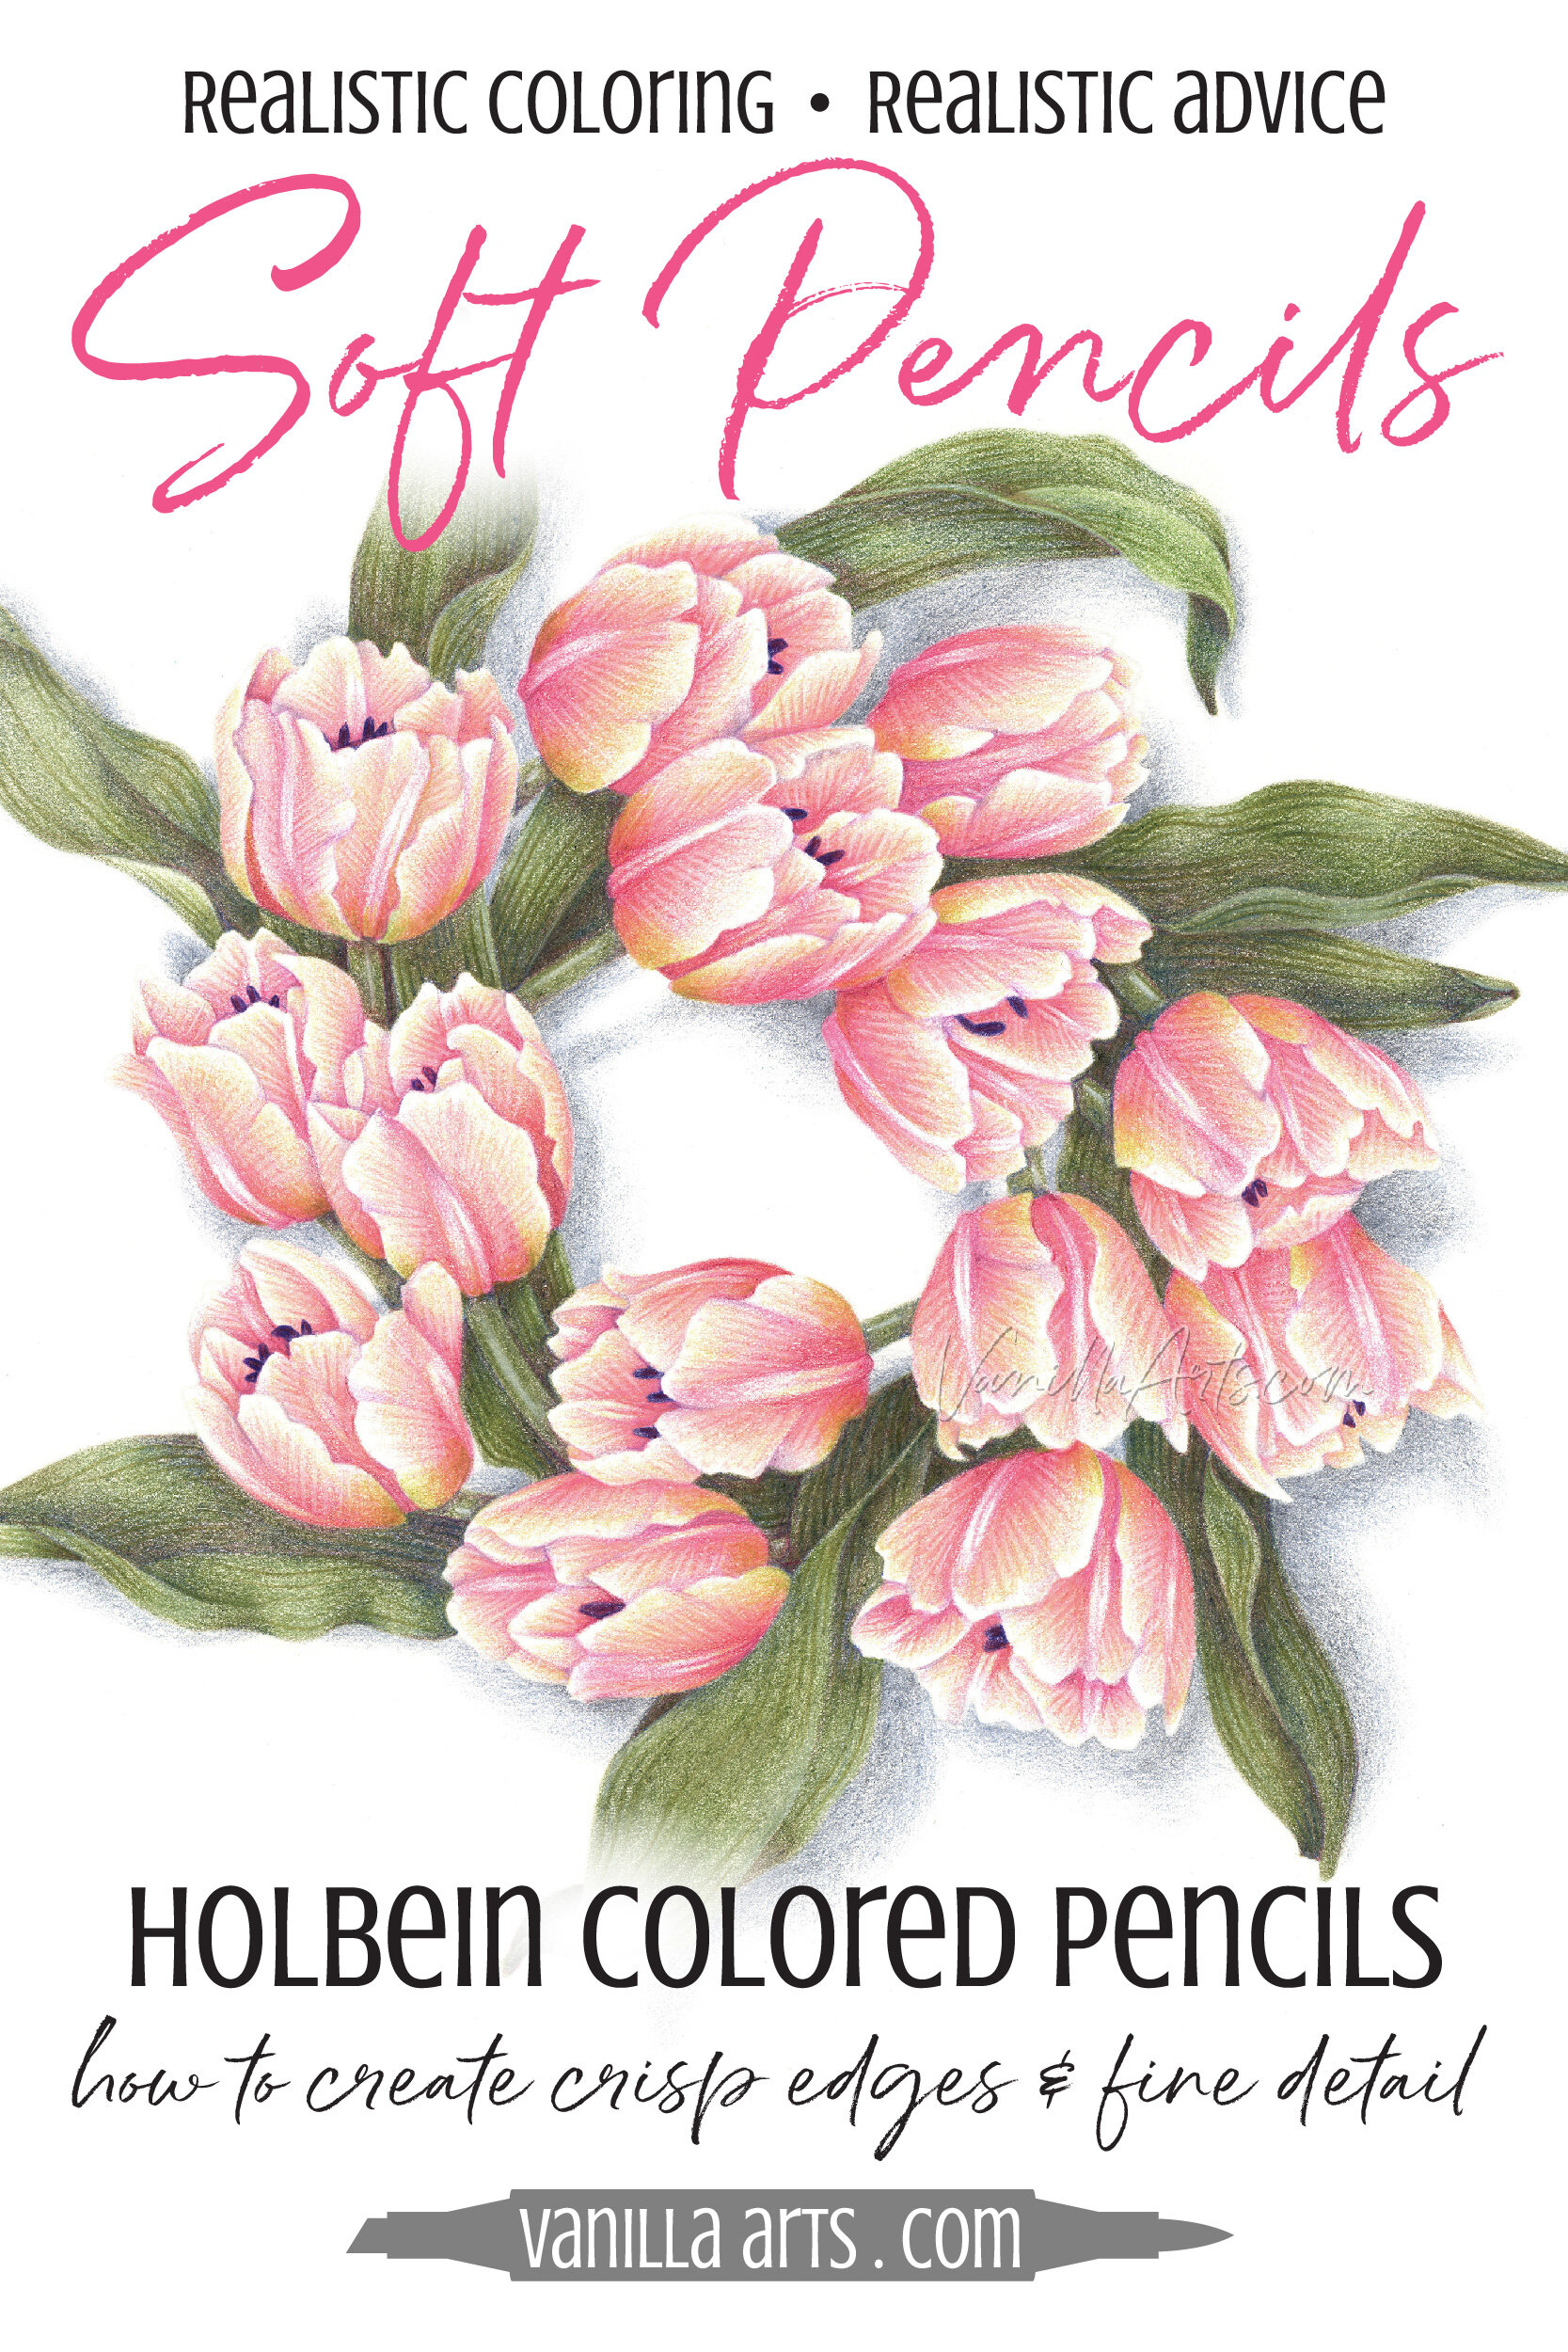 General Pencil Learn To Draw & Paint Watercolor Pencils : Target